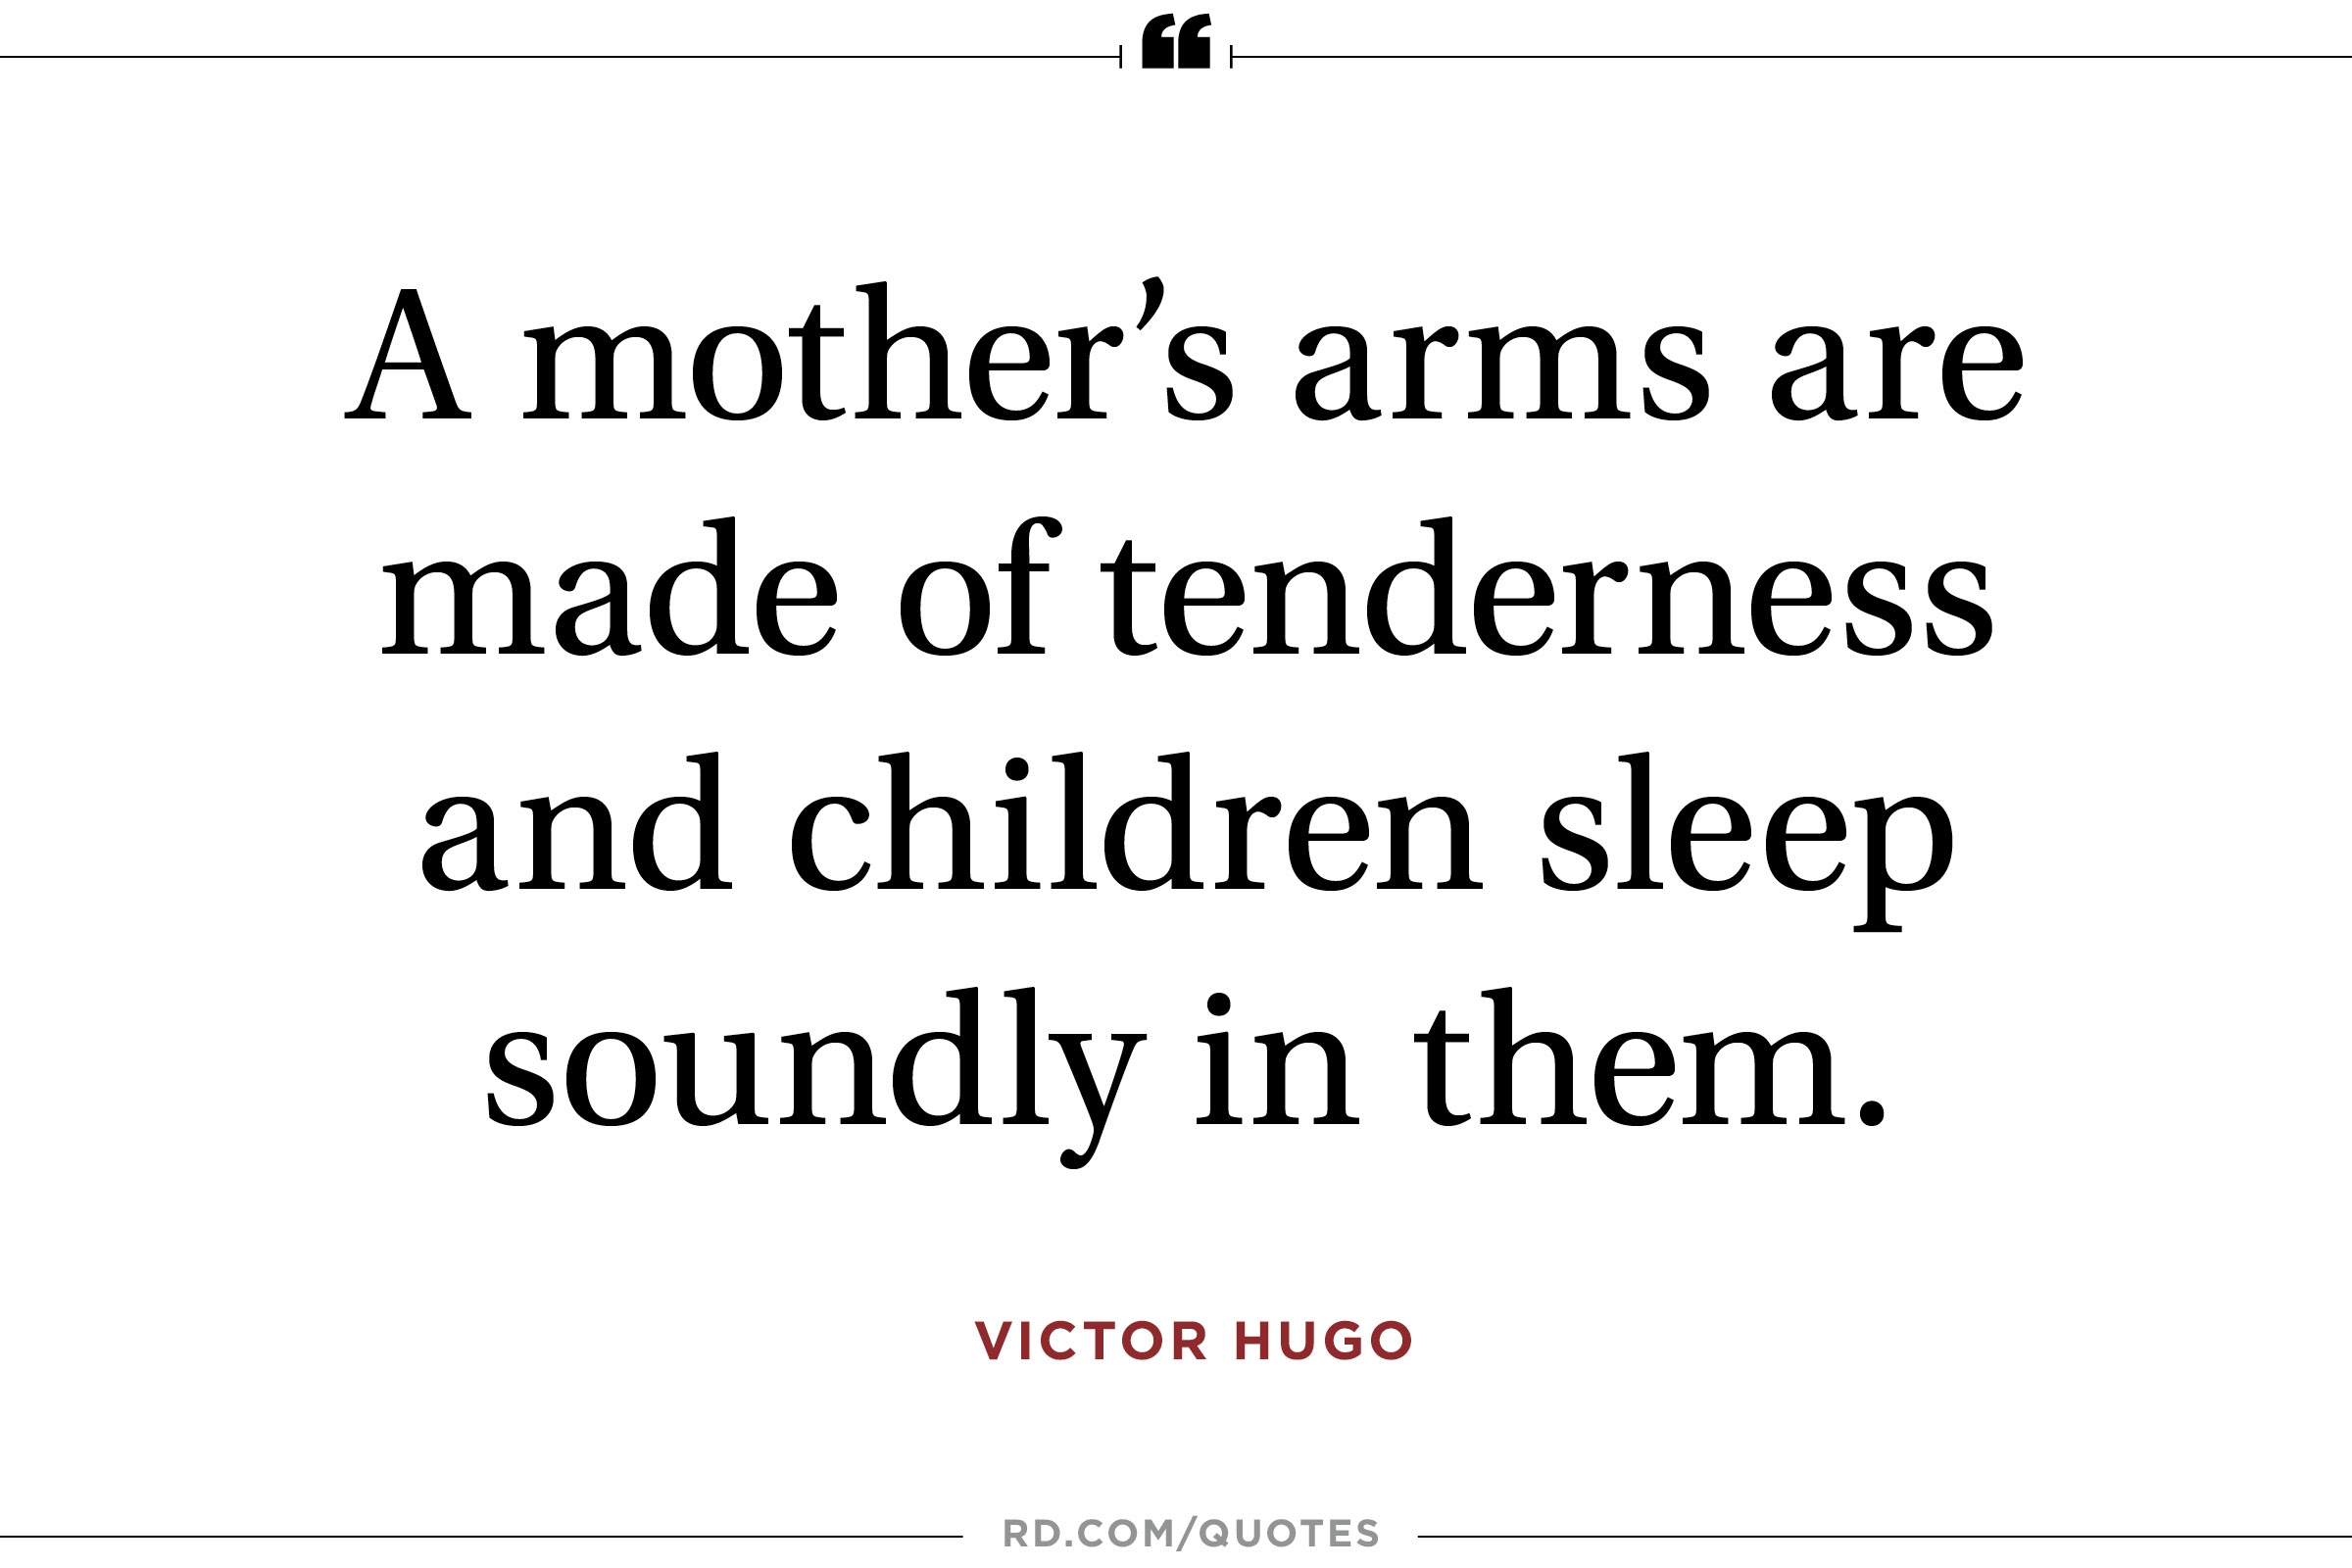 A mother’s arms are made of tenderness and children sleep soundly in them. Victor Hugo